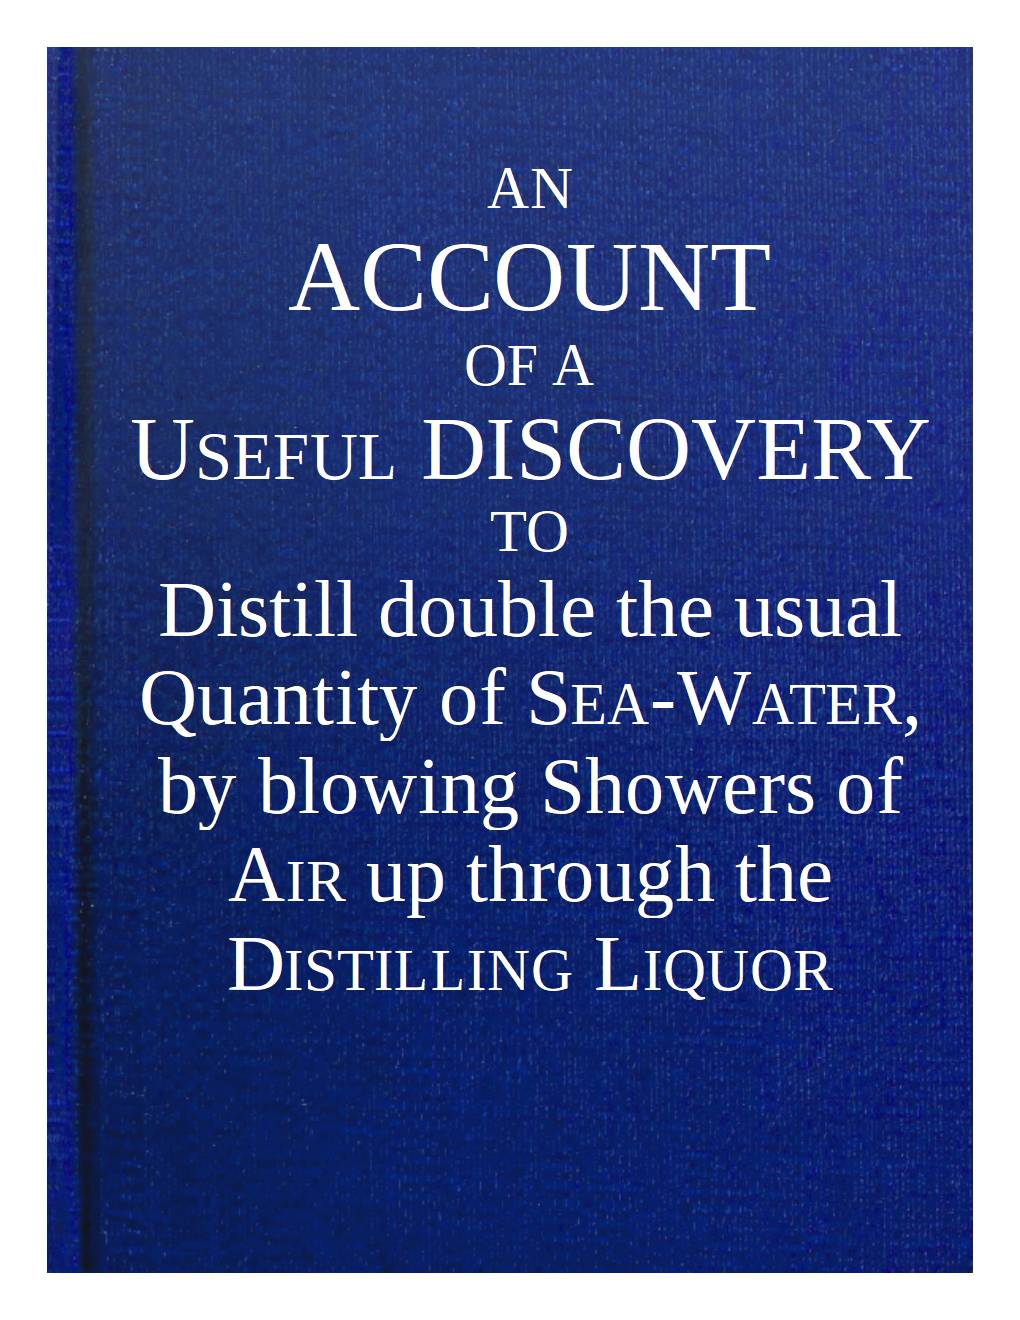 An account of a useful discovery to distill double the usual quantity of sea-water, by blowing showers of air up through the distilling liquor